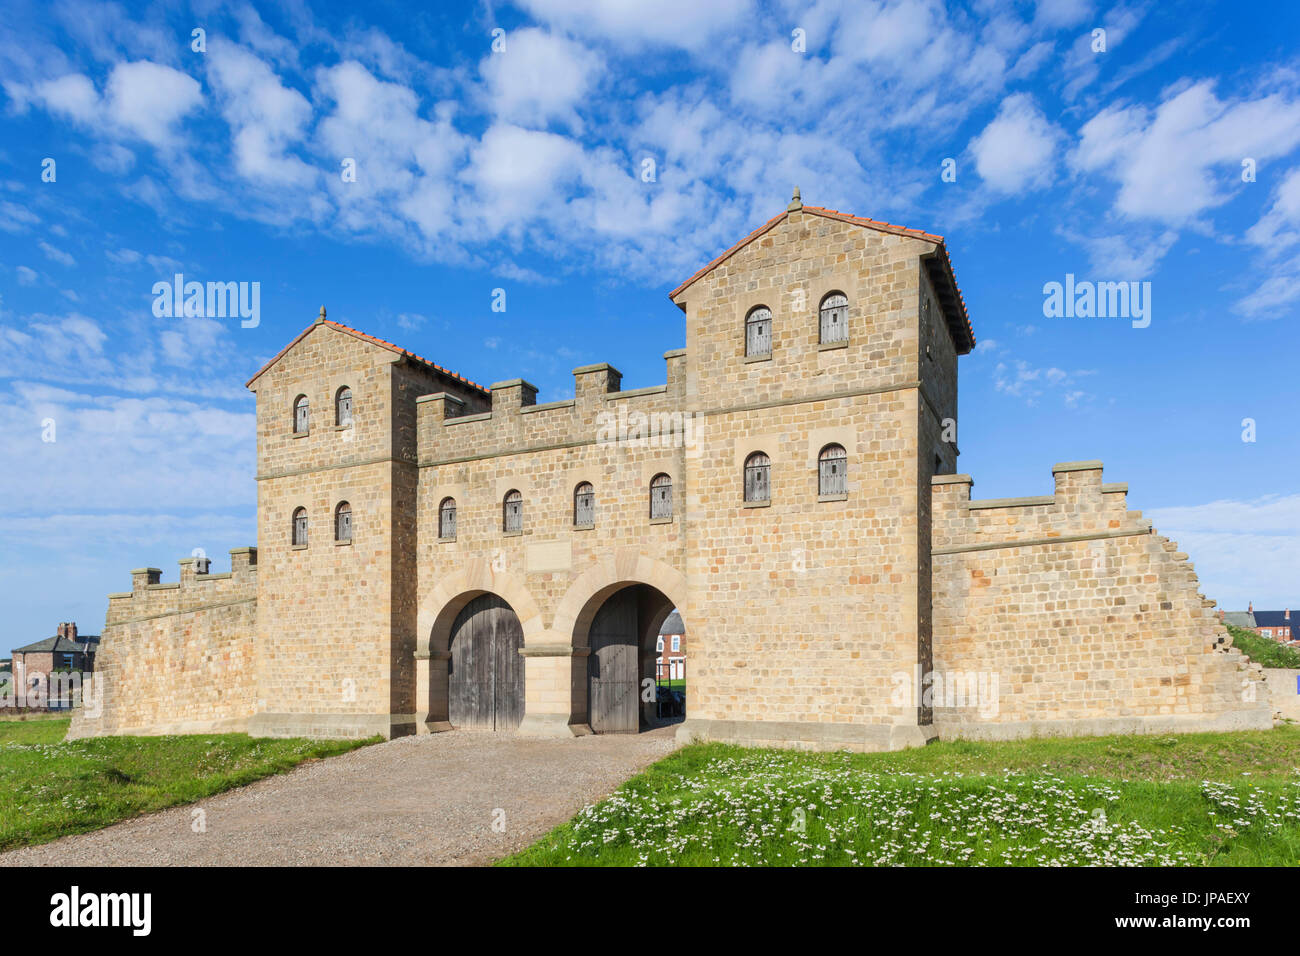 England, Tyne and Wear, South Shields, Arbeia Roman Fort and Museum Stock Photo